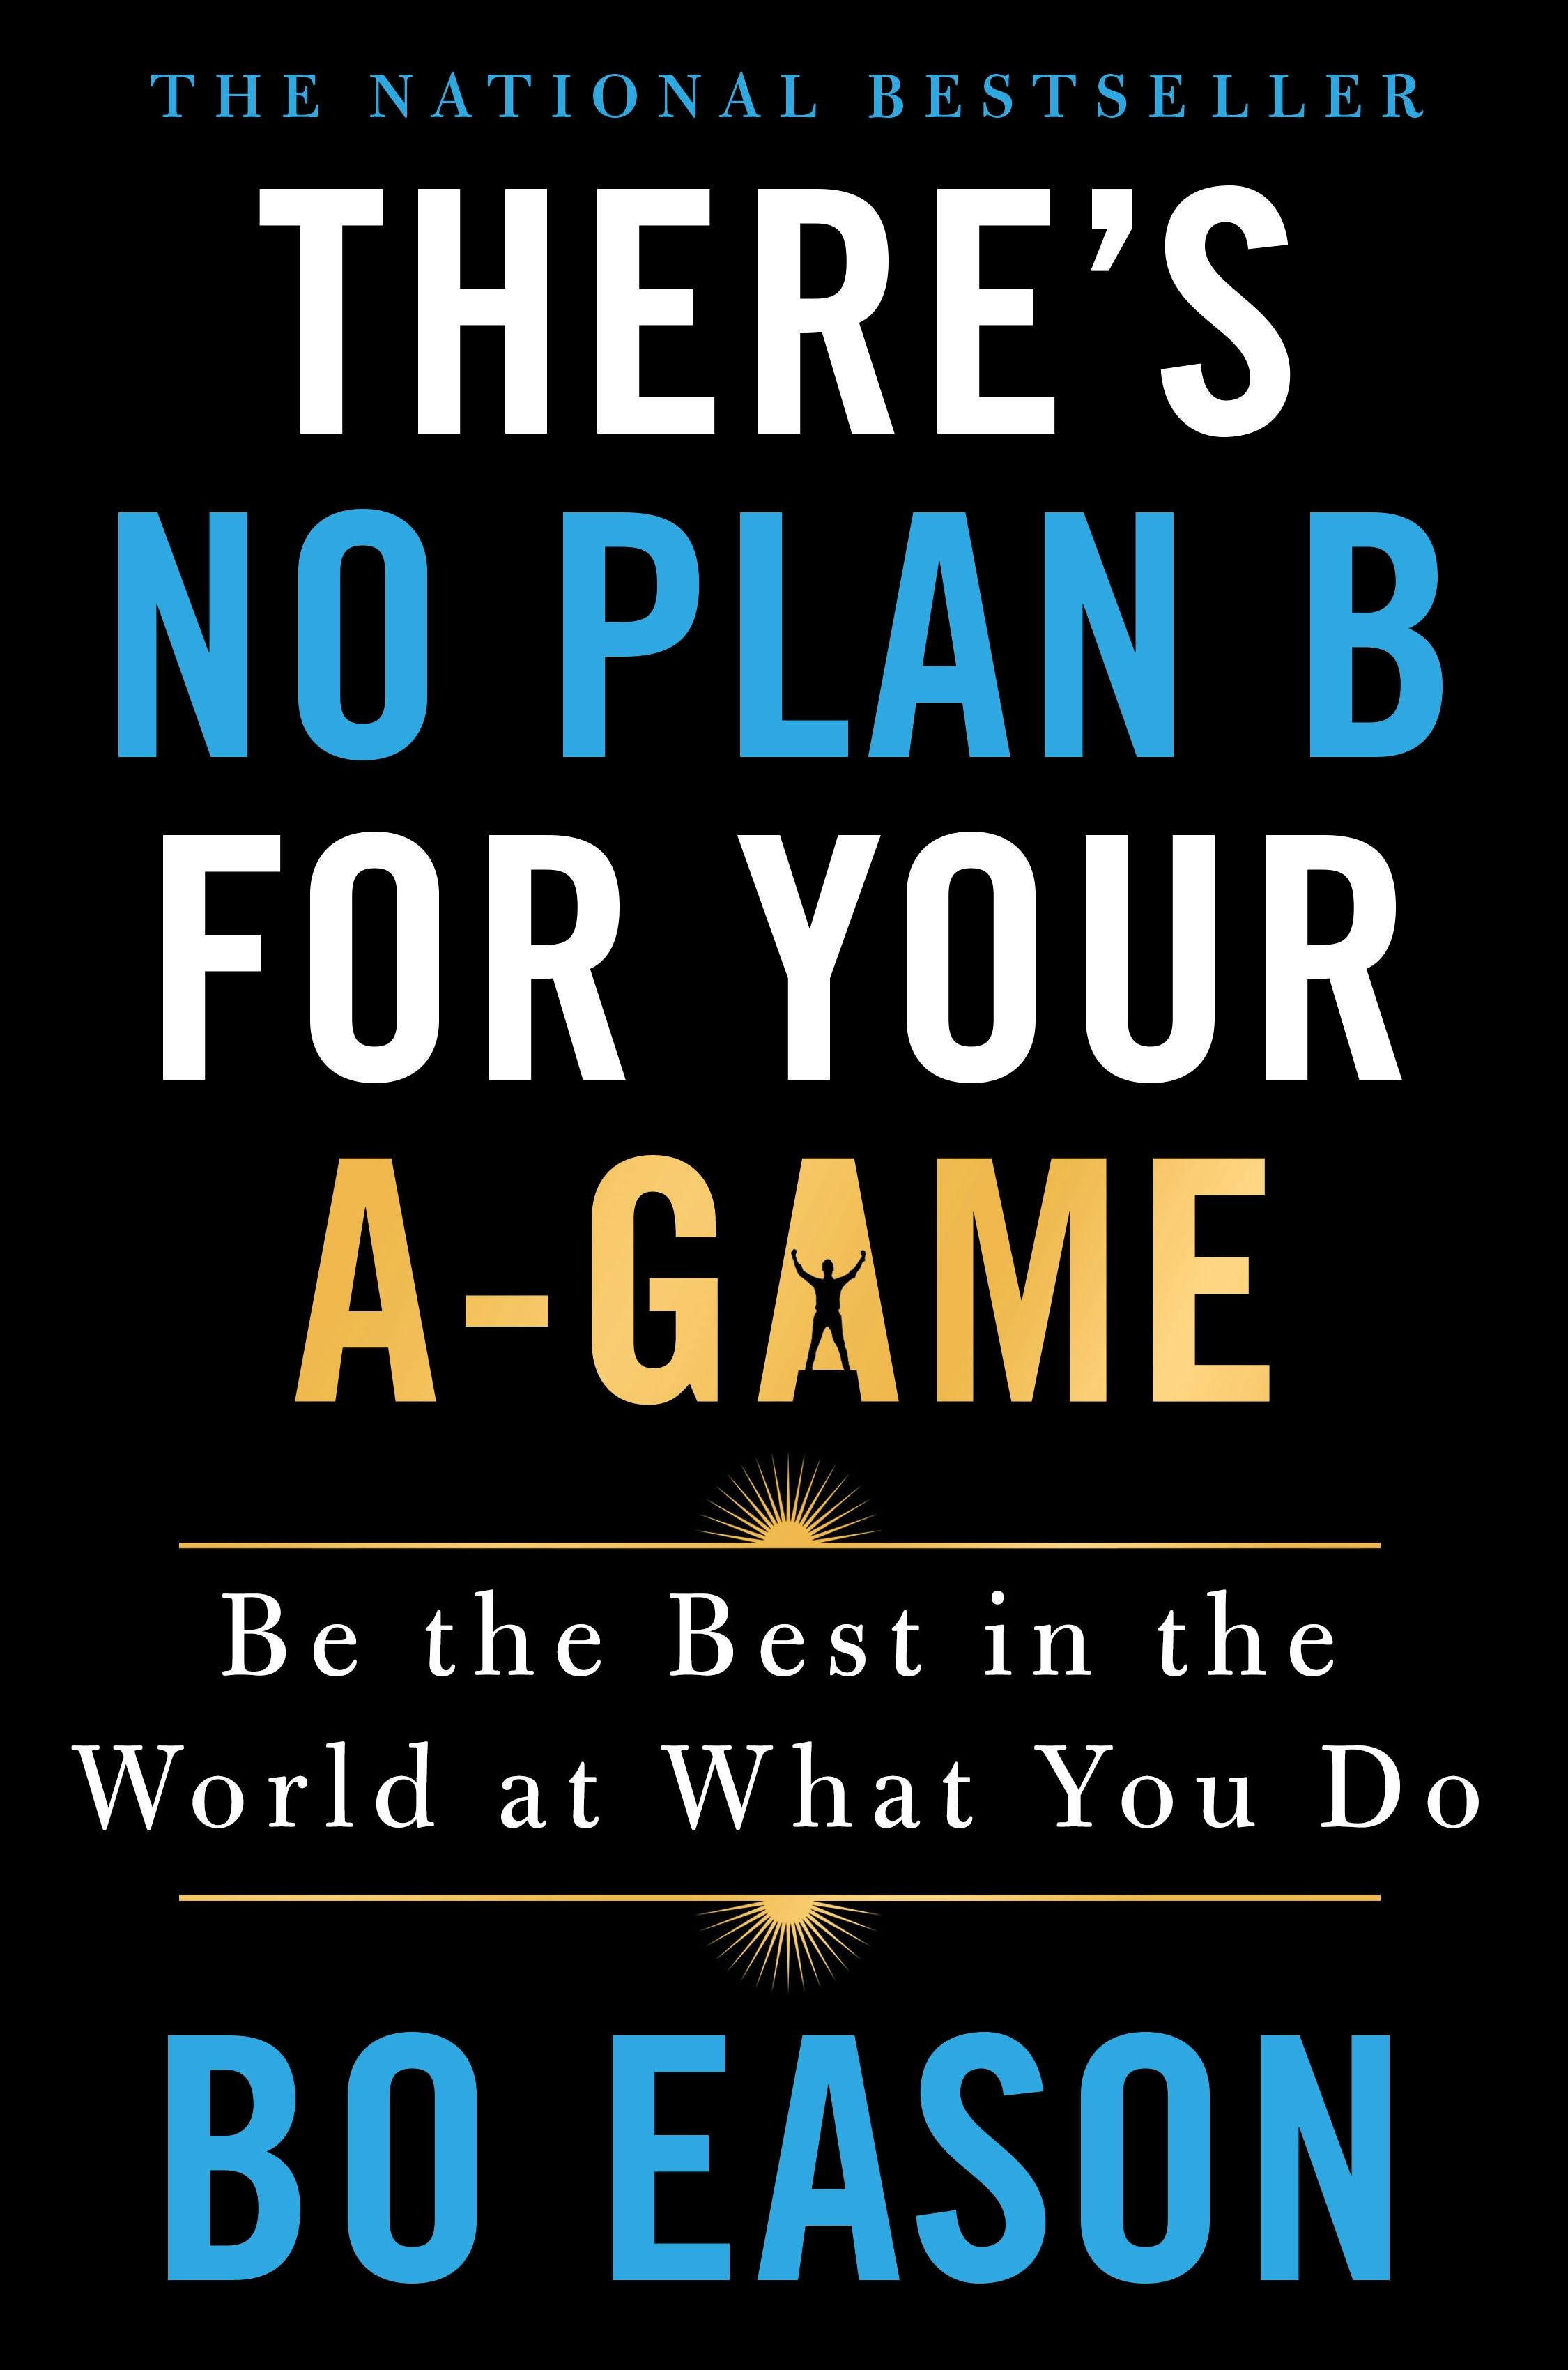 Describes for There’s No Plan B for Your A-Game by authors